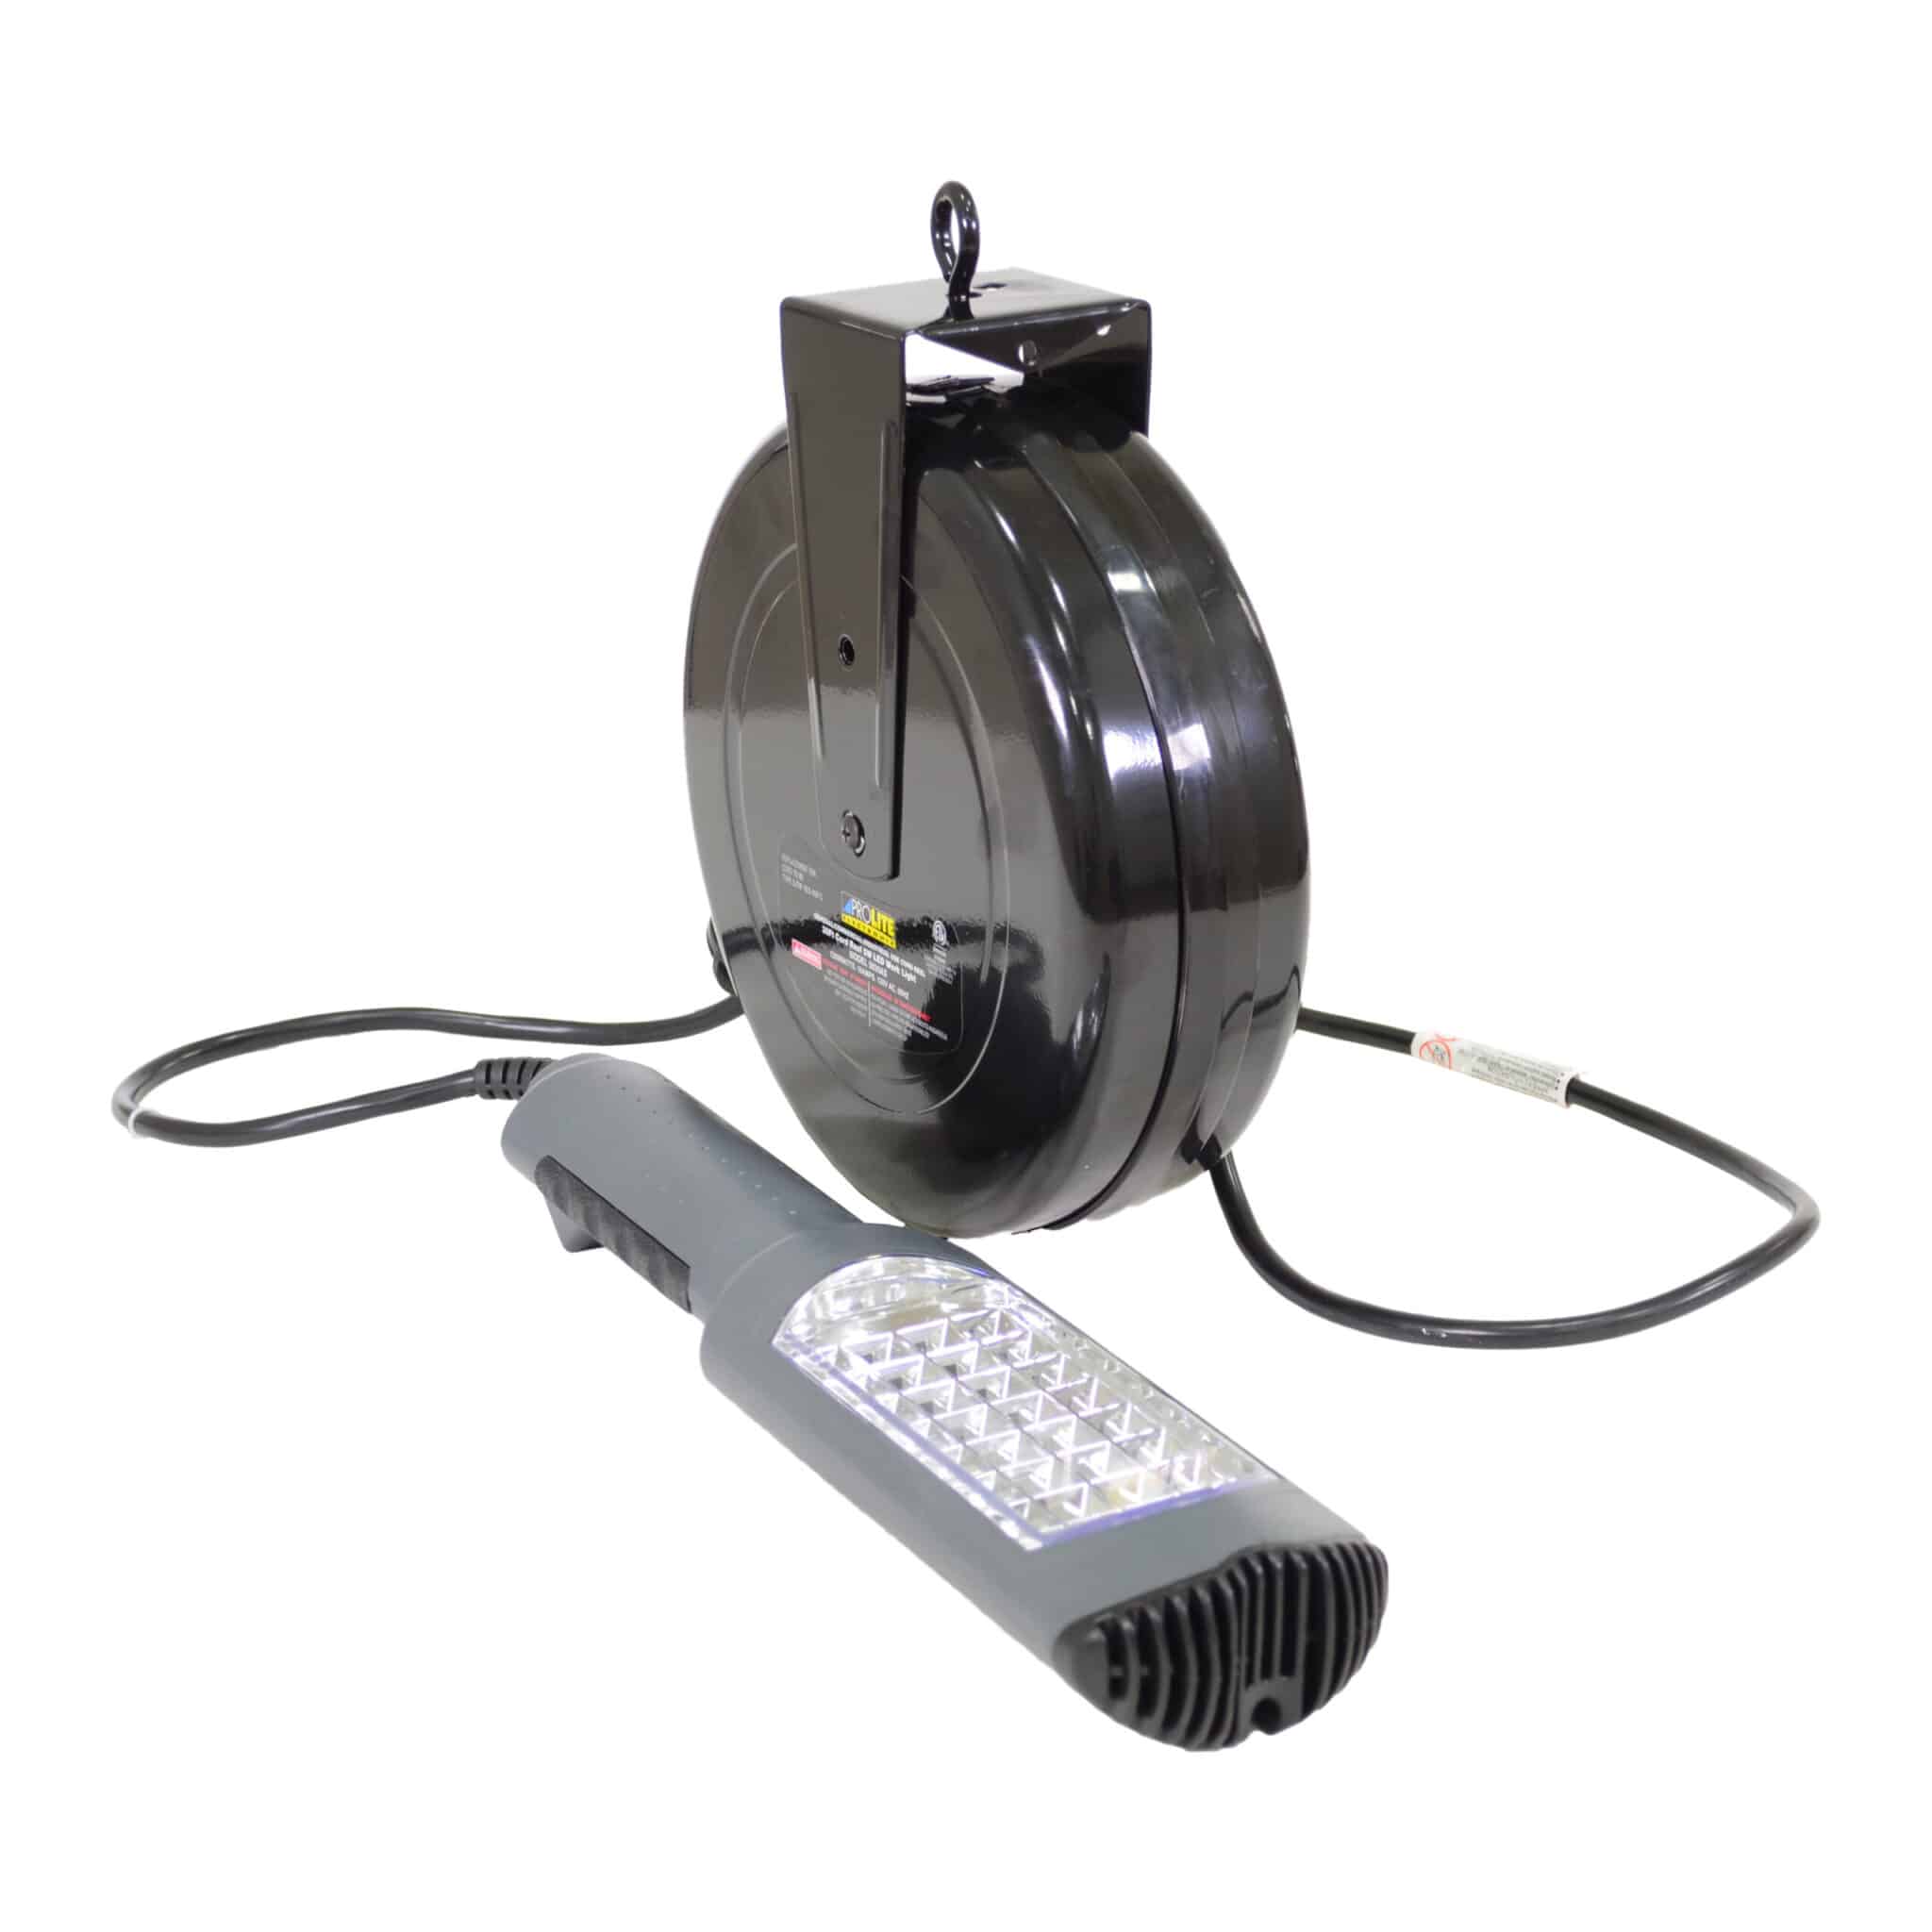 30' ProReel Retractable Cord Reel with Light - 5030AS